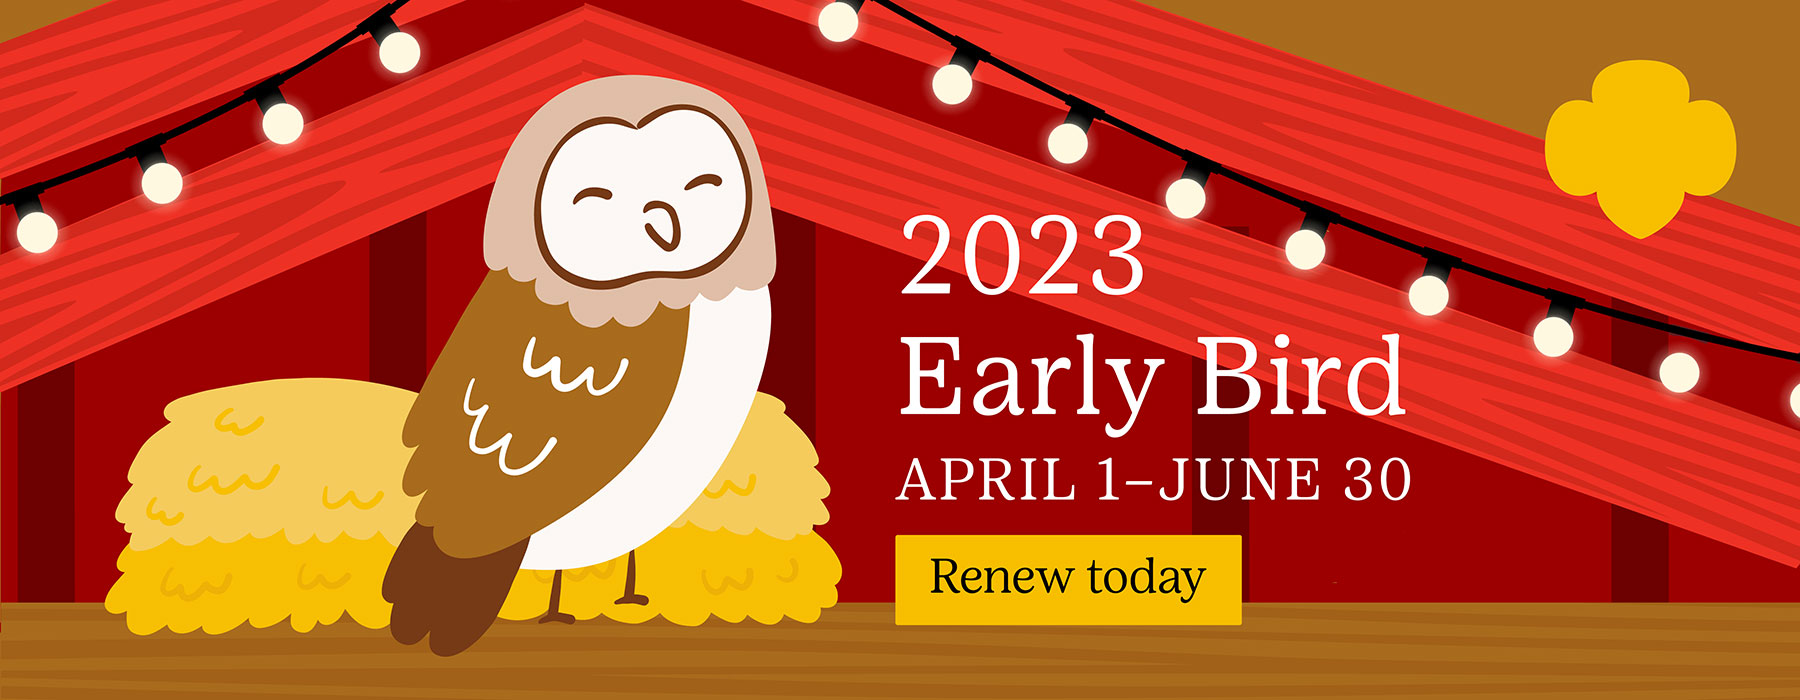 Barn owl illustration with text, 2023 Early Bird April 1-June 30